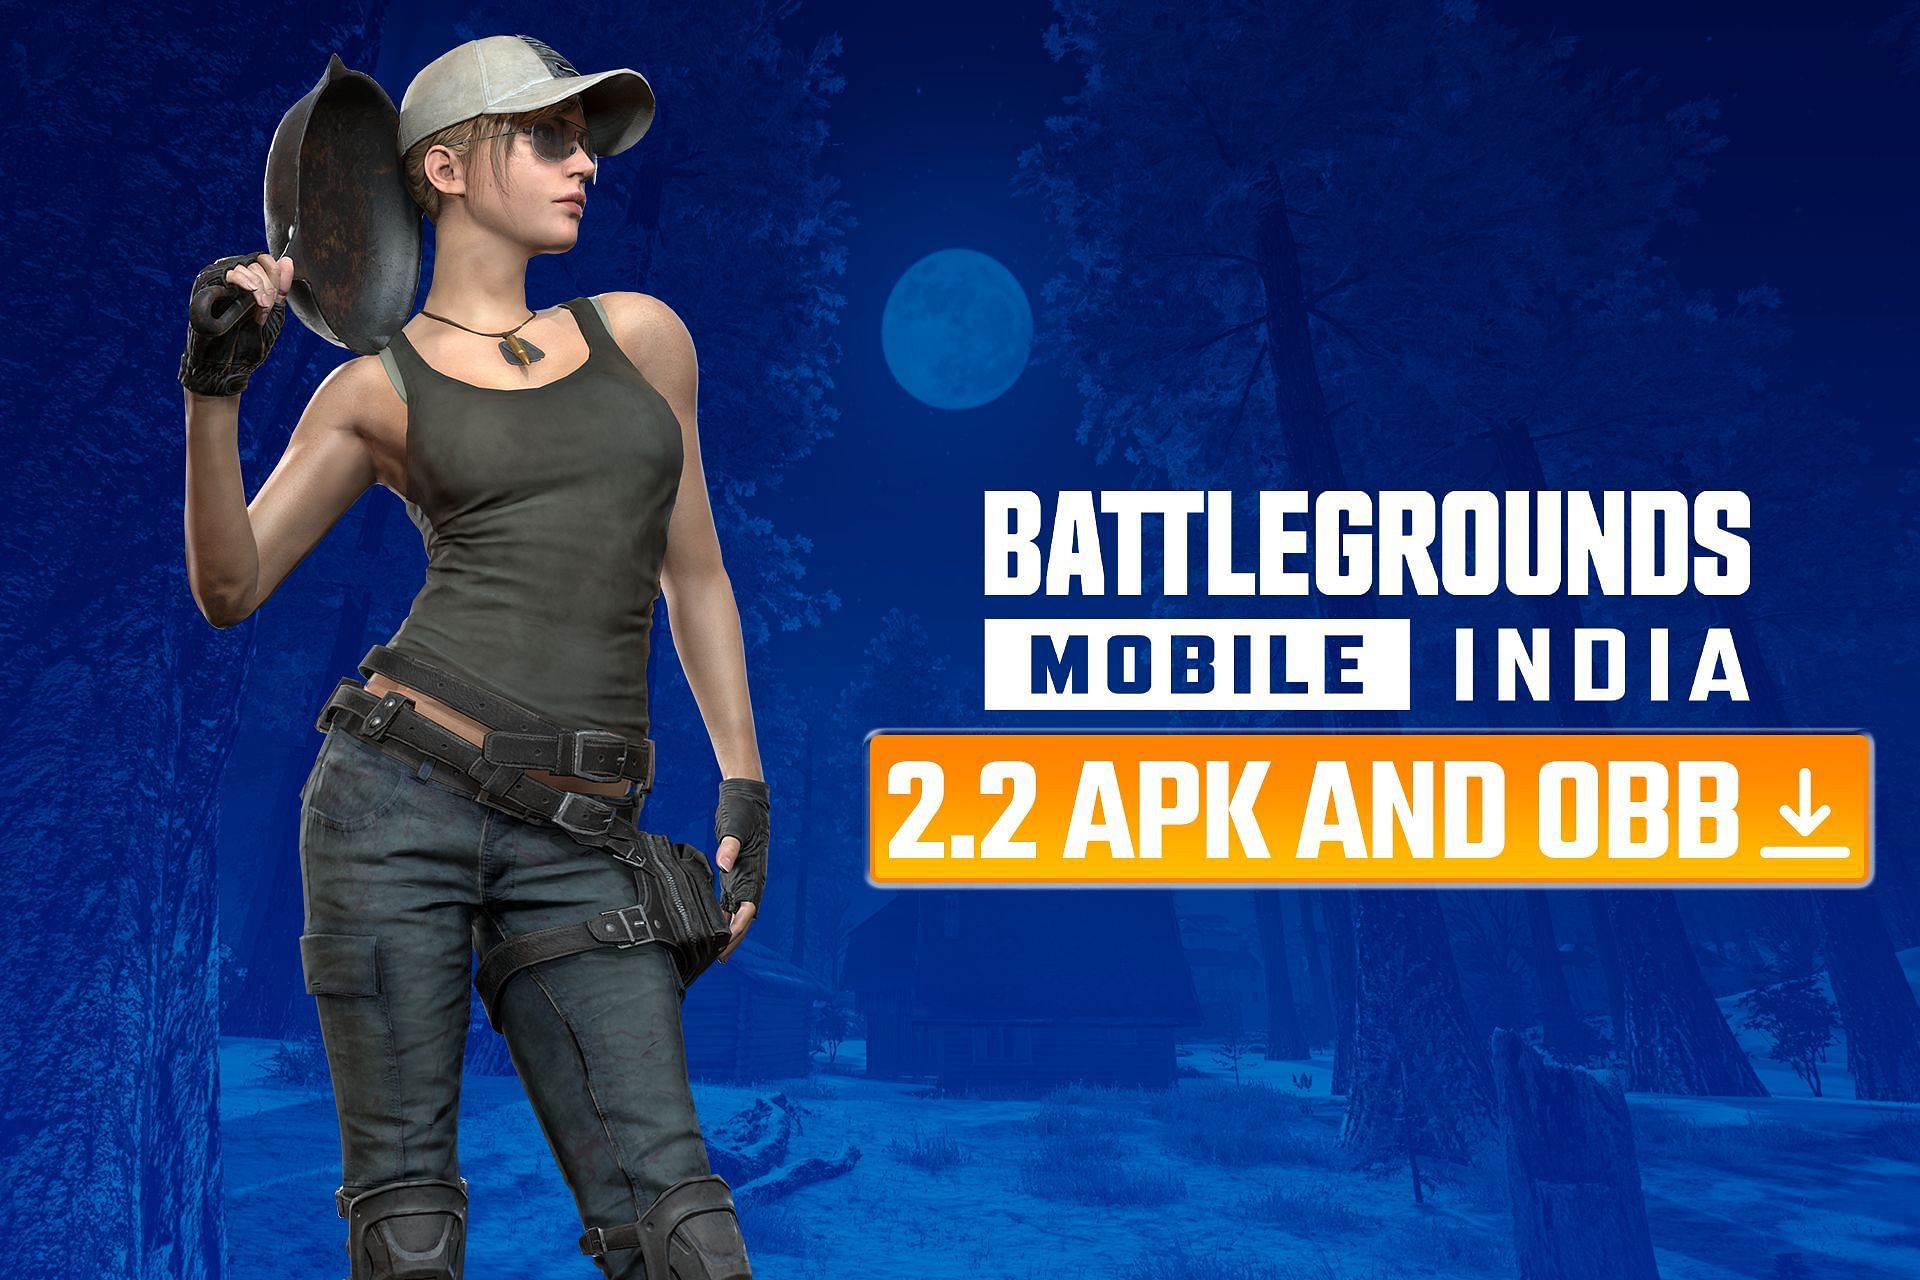 Gamers can find plenty of fake download links to Battlegrounds Mobile India 2.2 APK and OBB files (Image via Sportskeeda)